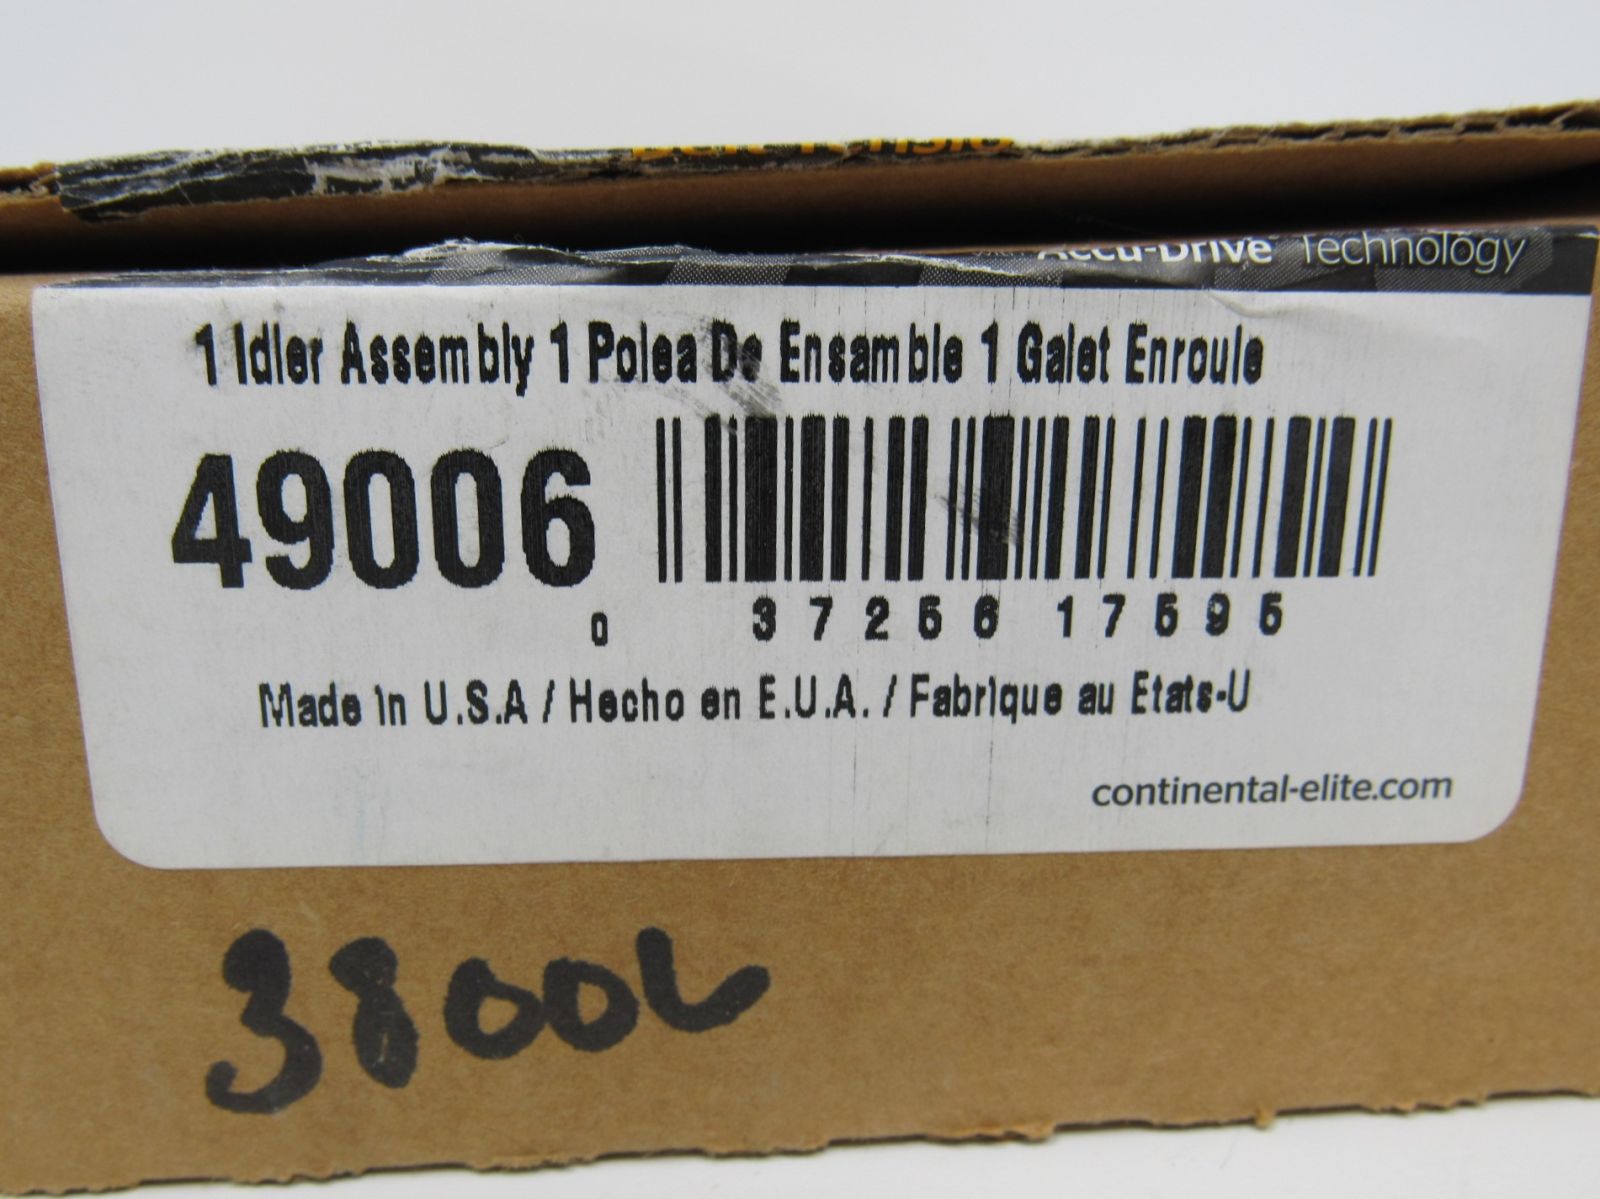 Continental Elite Idler Assembly Accu-Drive Pulley Belt Tensioning Systems 49006 -- New